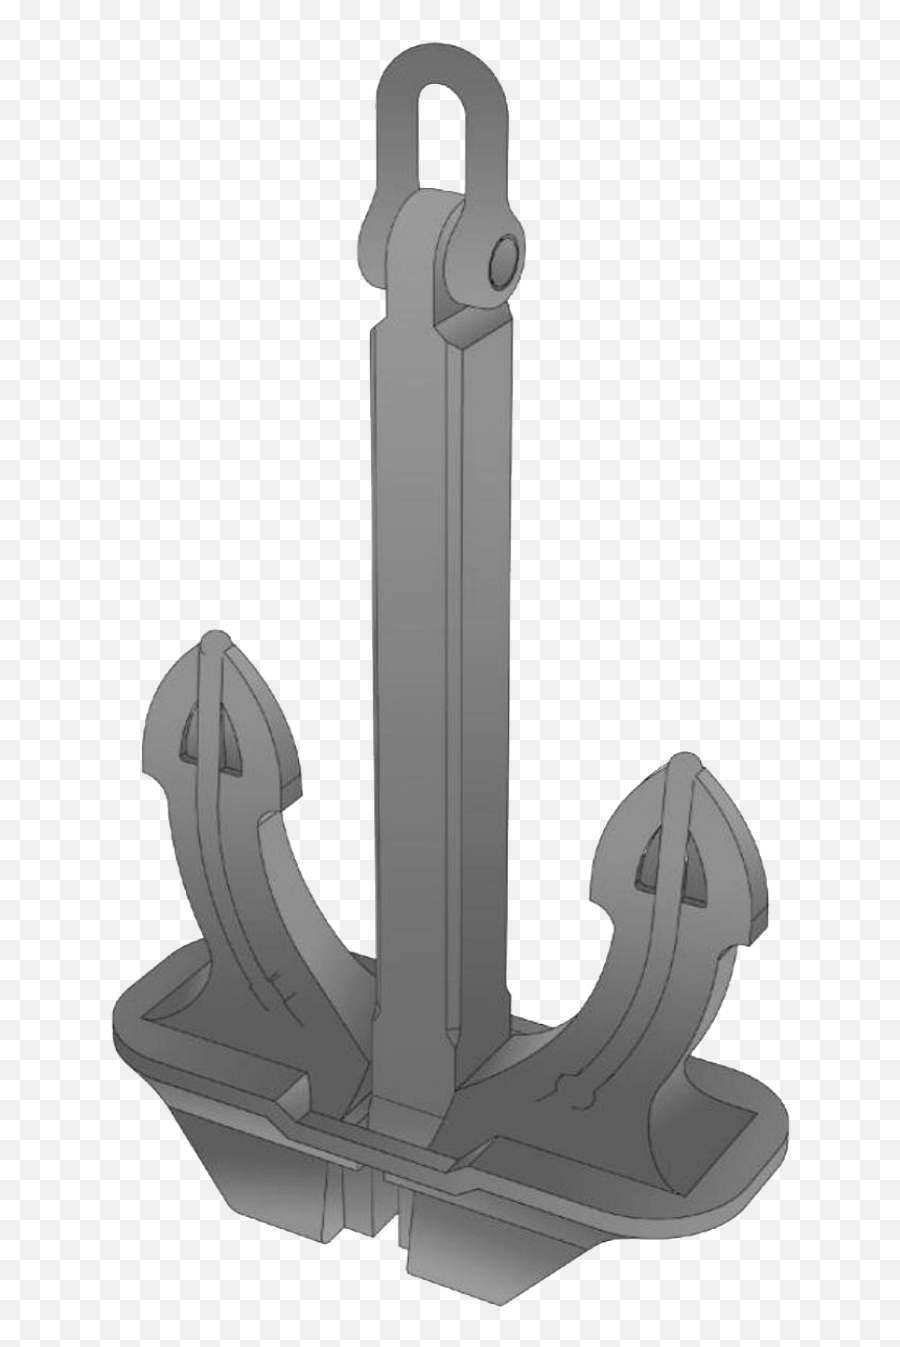 Stockless Anchors Iacs Certified Conventional Anchor - Hall Anchor Emoji,Us Navy Anchor Logo